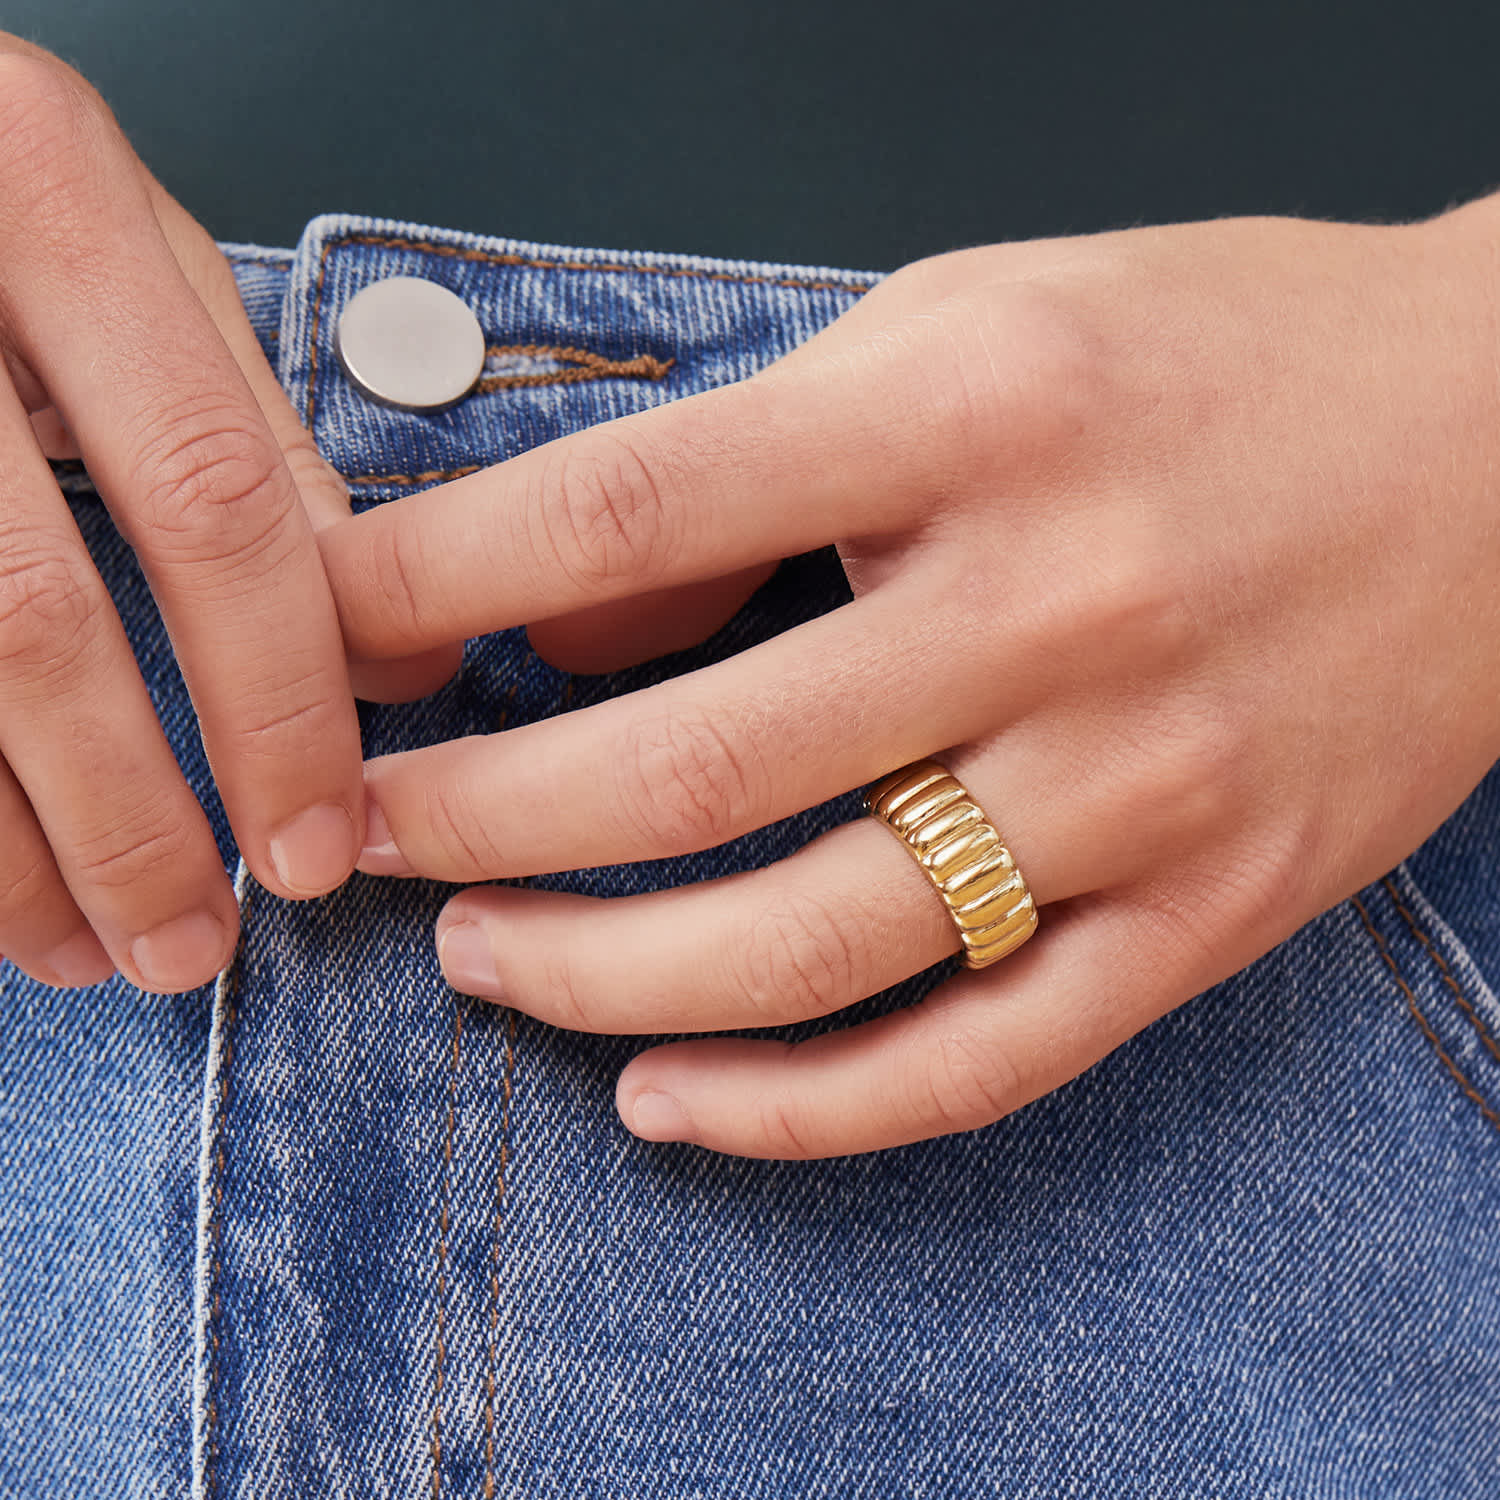 A person wearing the ring while holding their hands in front of their jeans